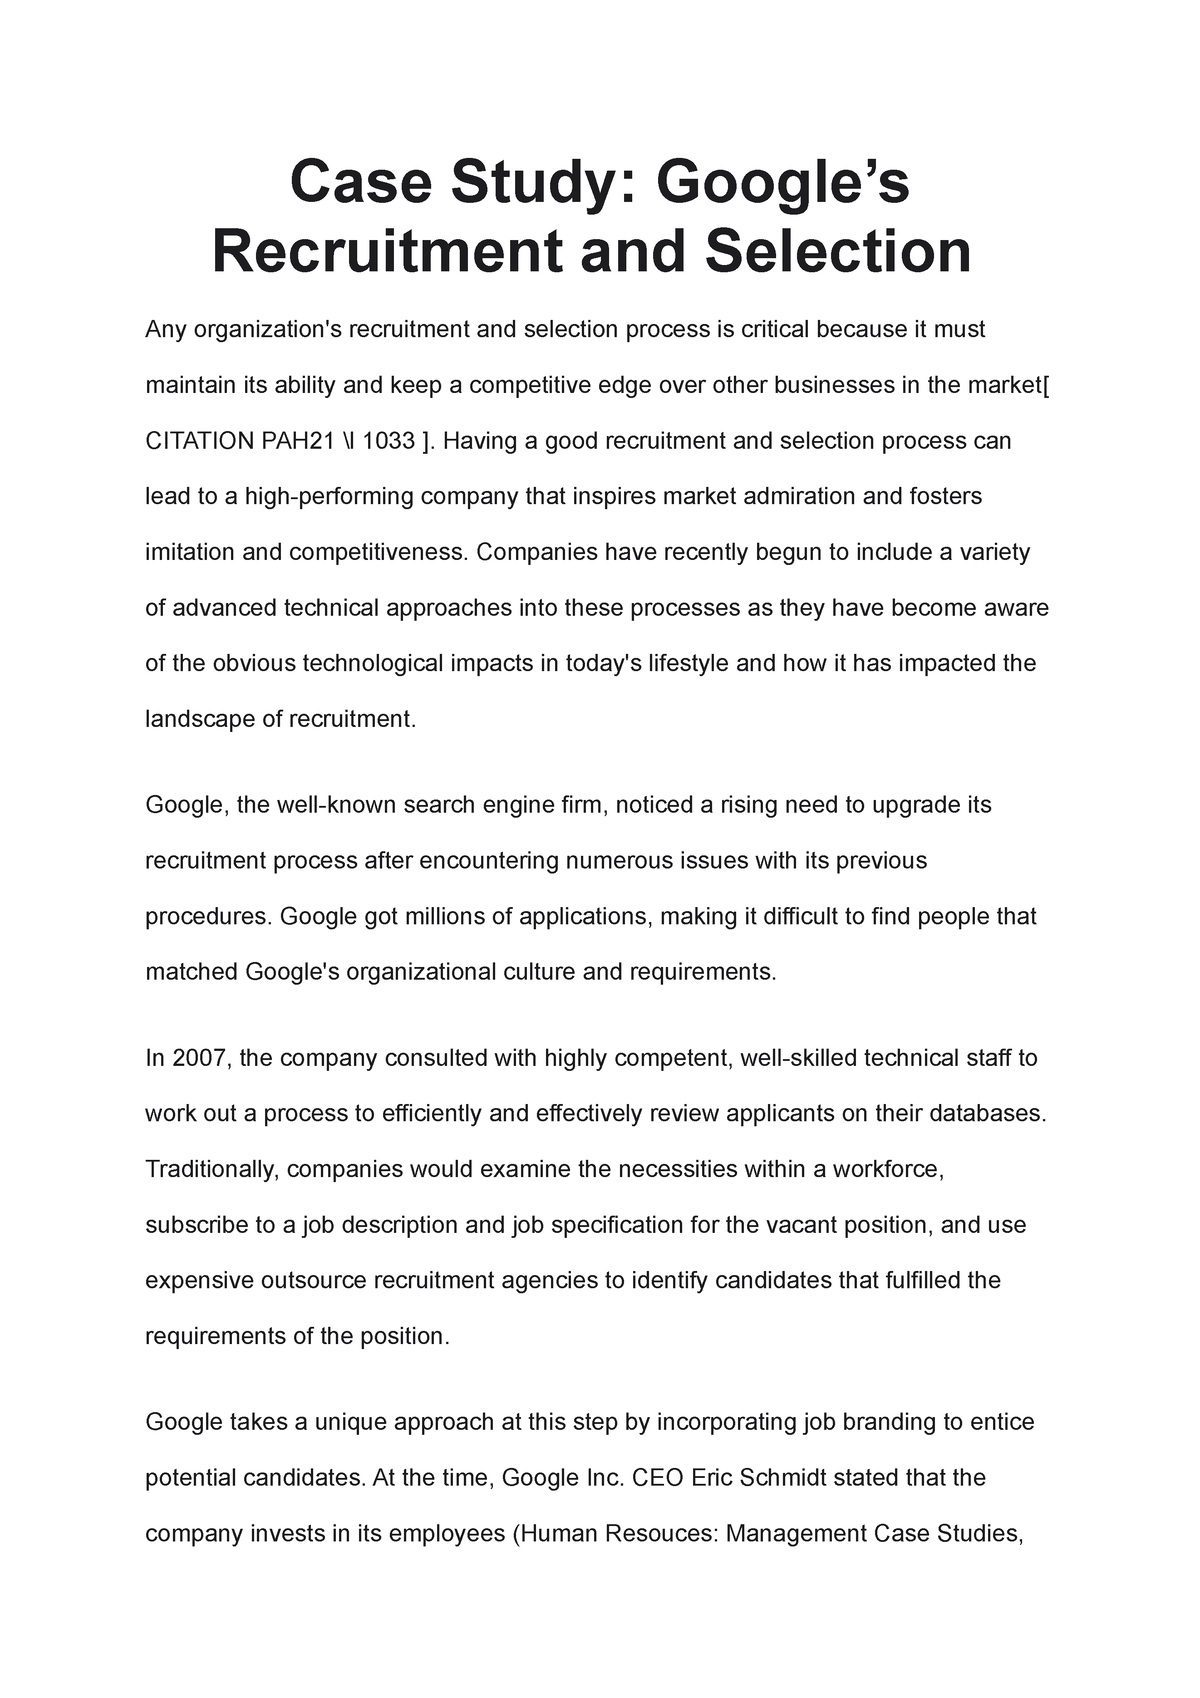 case study recruitment and selection at google